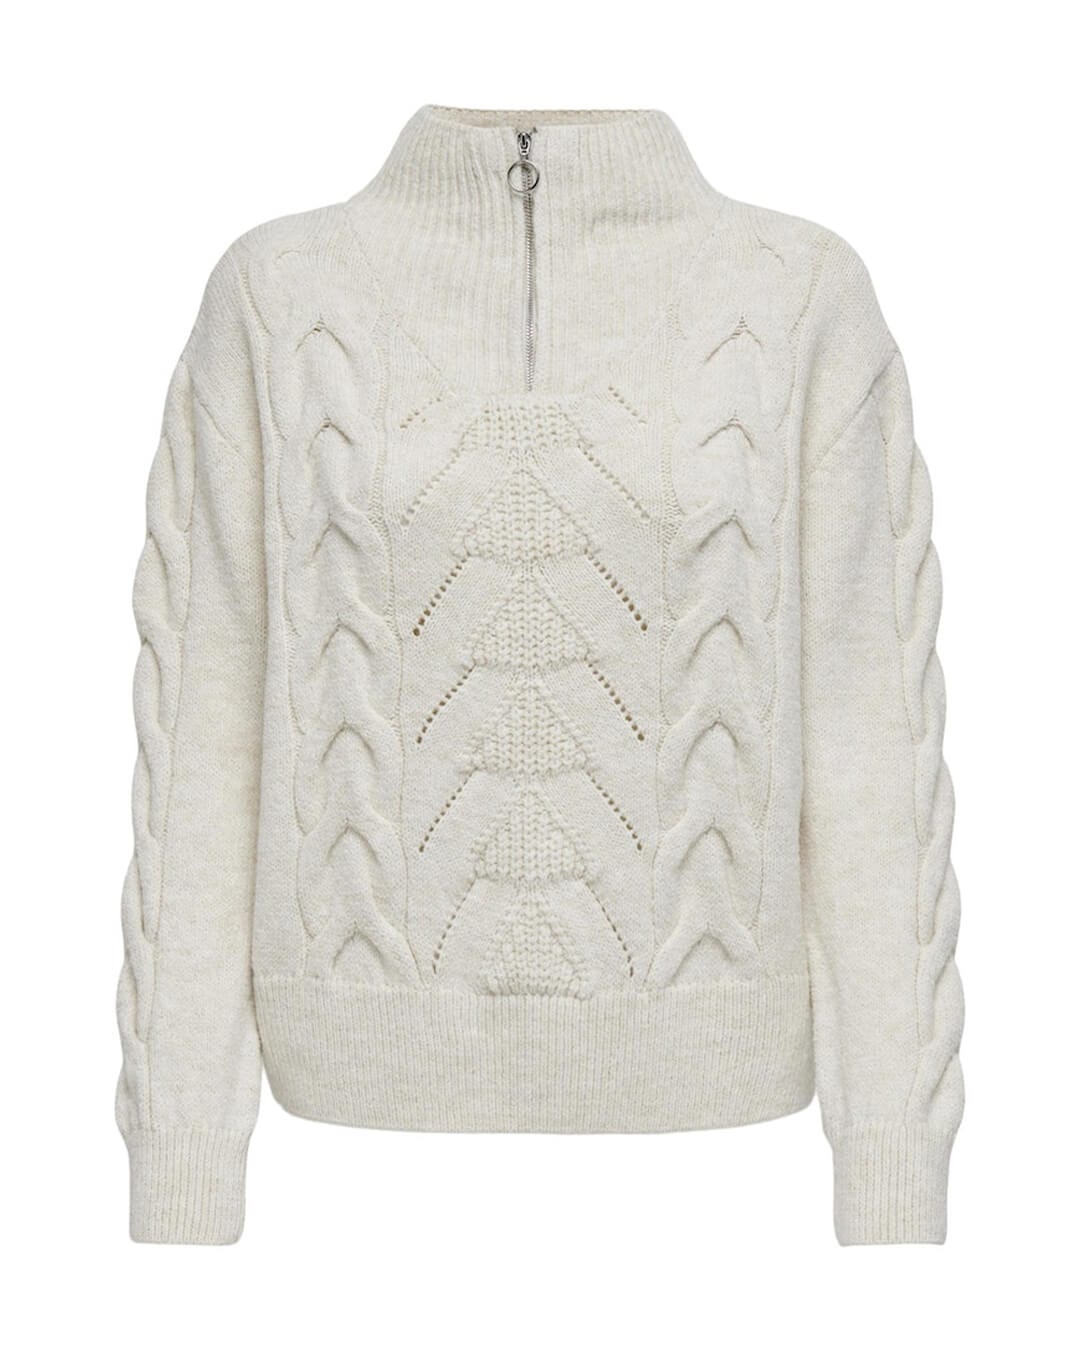 Only Jumpers Only Leise Grey Zip Neck Jumper